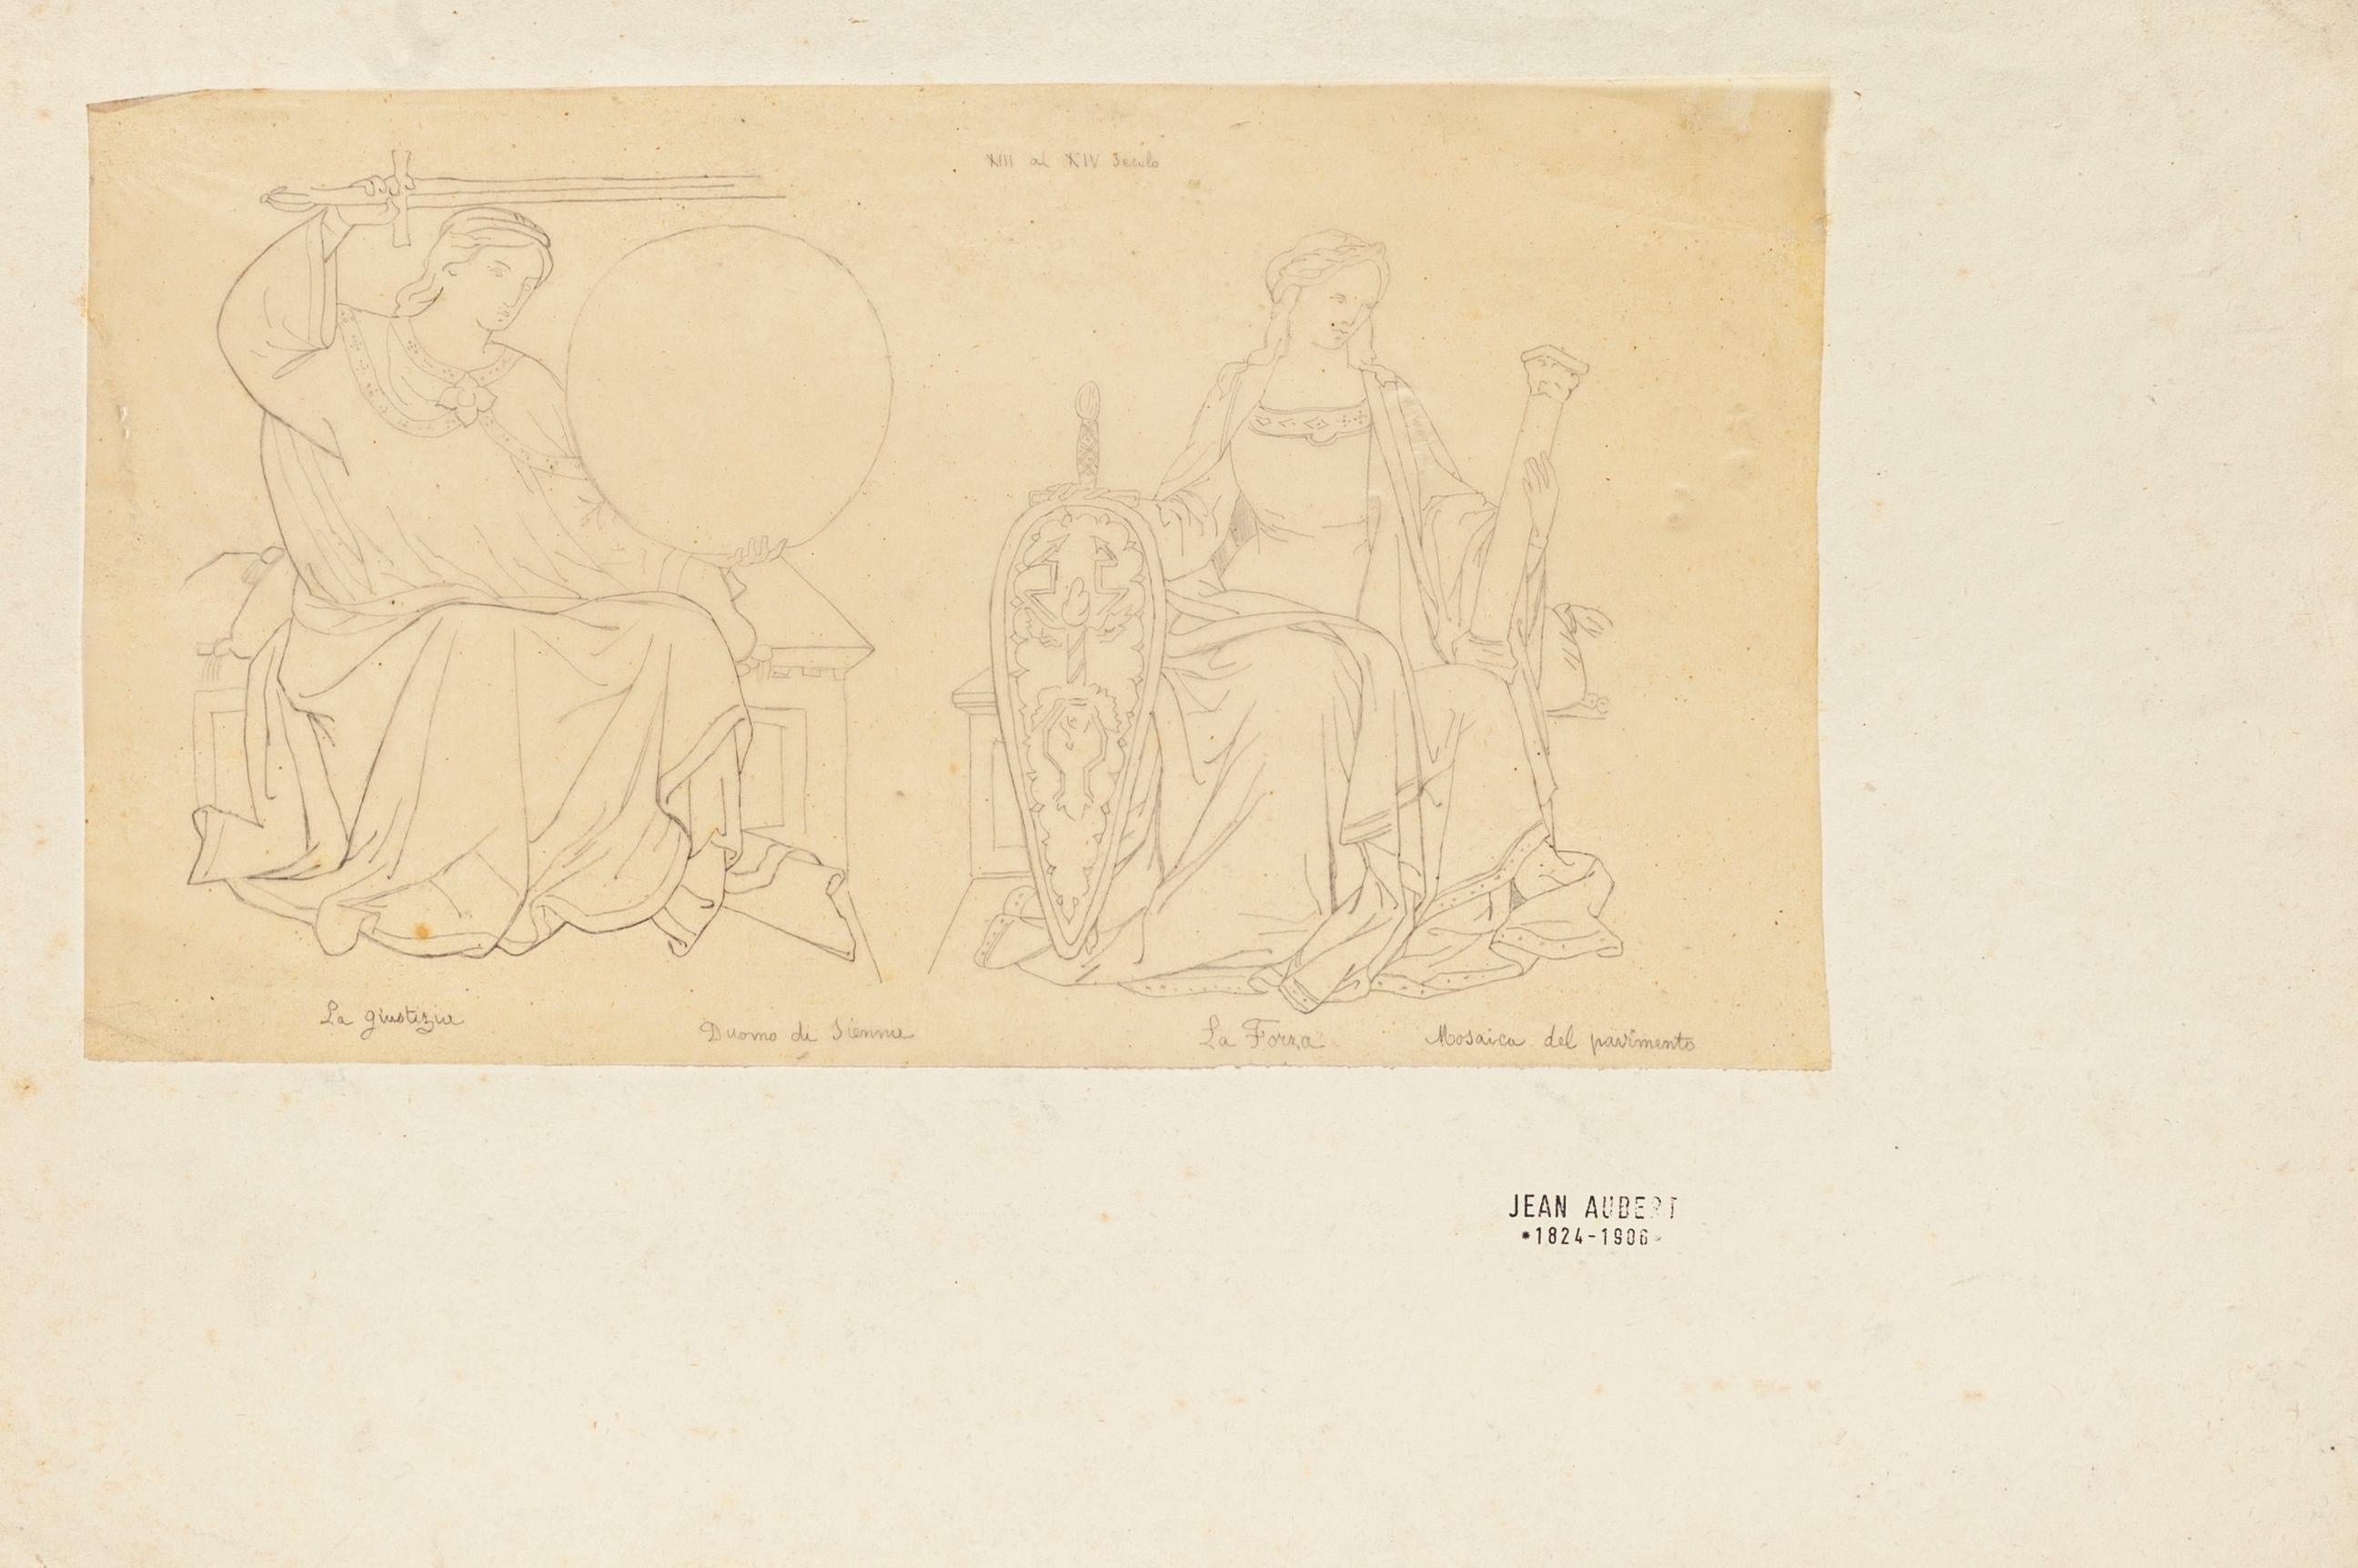 Jean Aubert Figurative Art - Scene from the Pavement of the Dome in Siena - Pencil Drawing - 1844